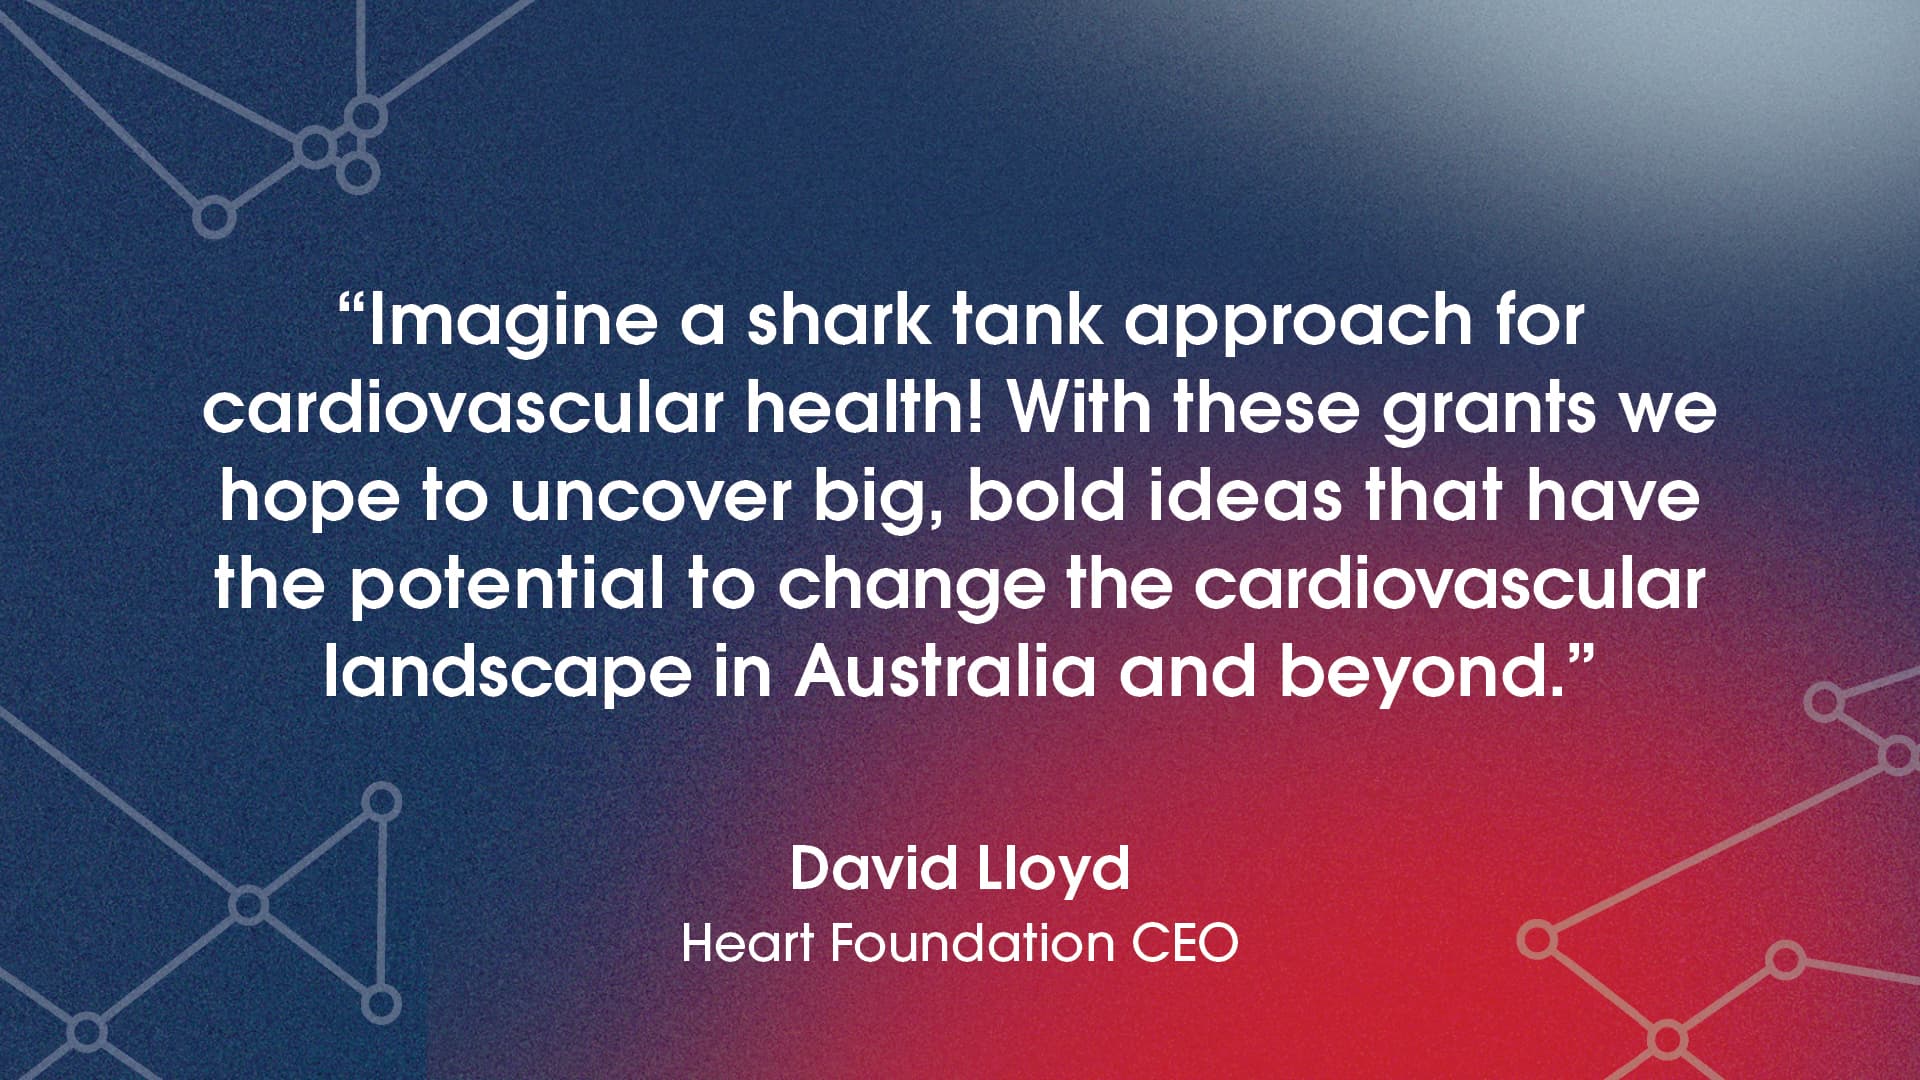 quote from David Loyd about catalyst partnership grants